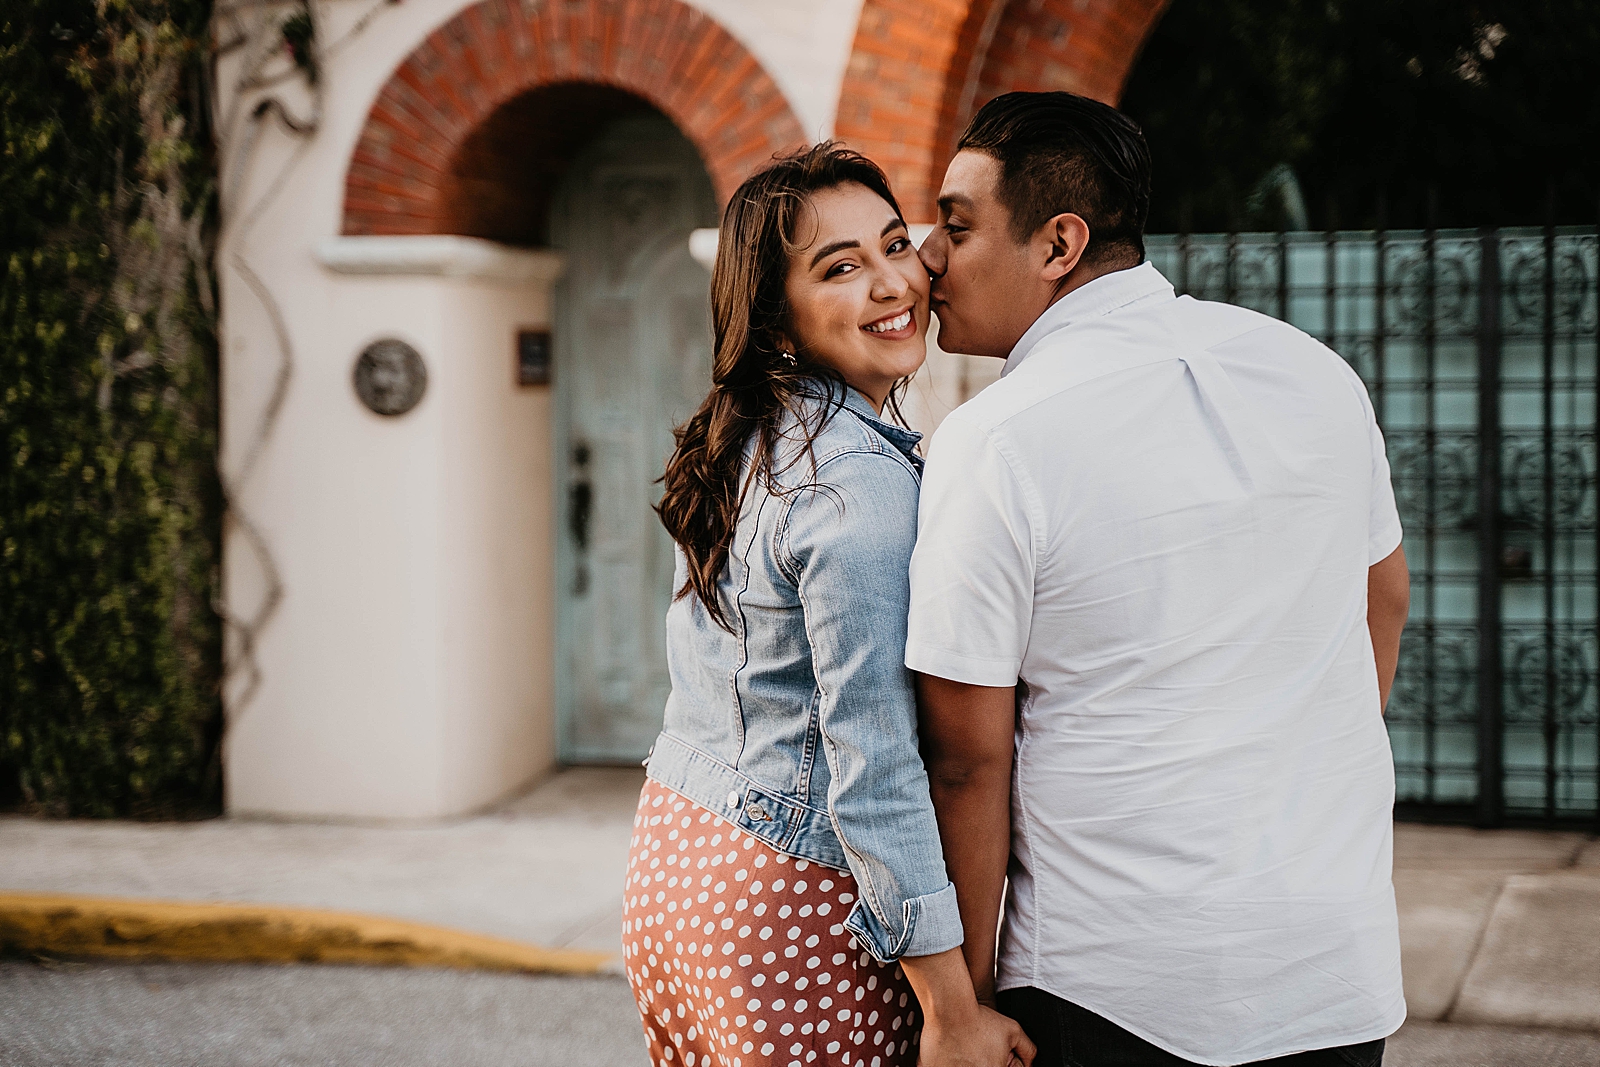 Man kisses woman on her cheek as they hold hands Palm Beach Island Engagement Photography captured by South Florida Engagement Photographer Krystal Capone Photography 